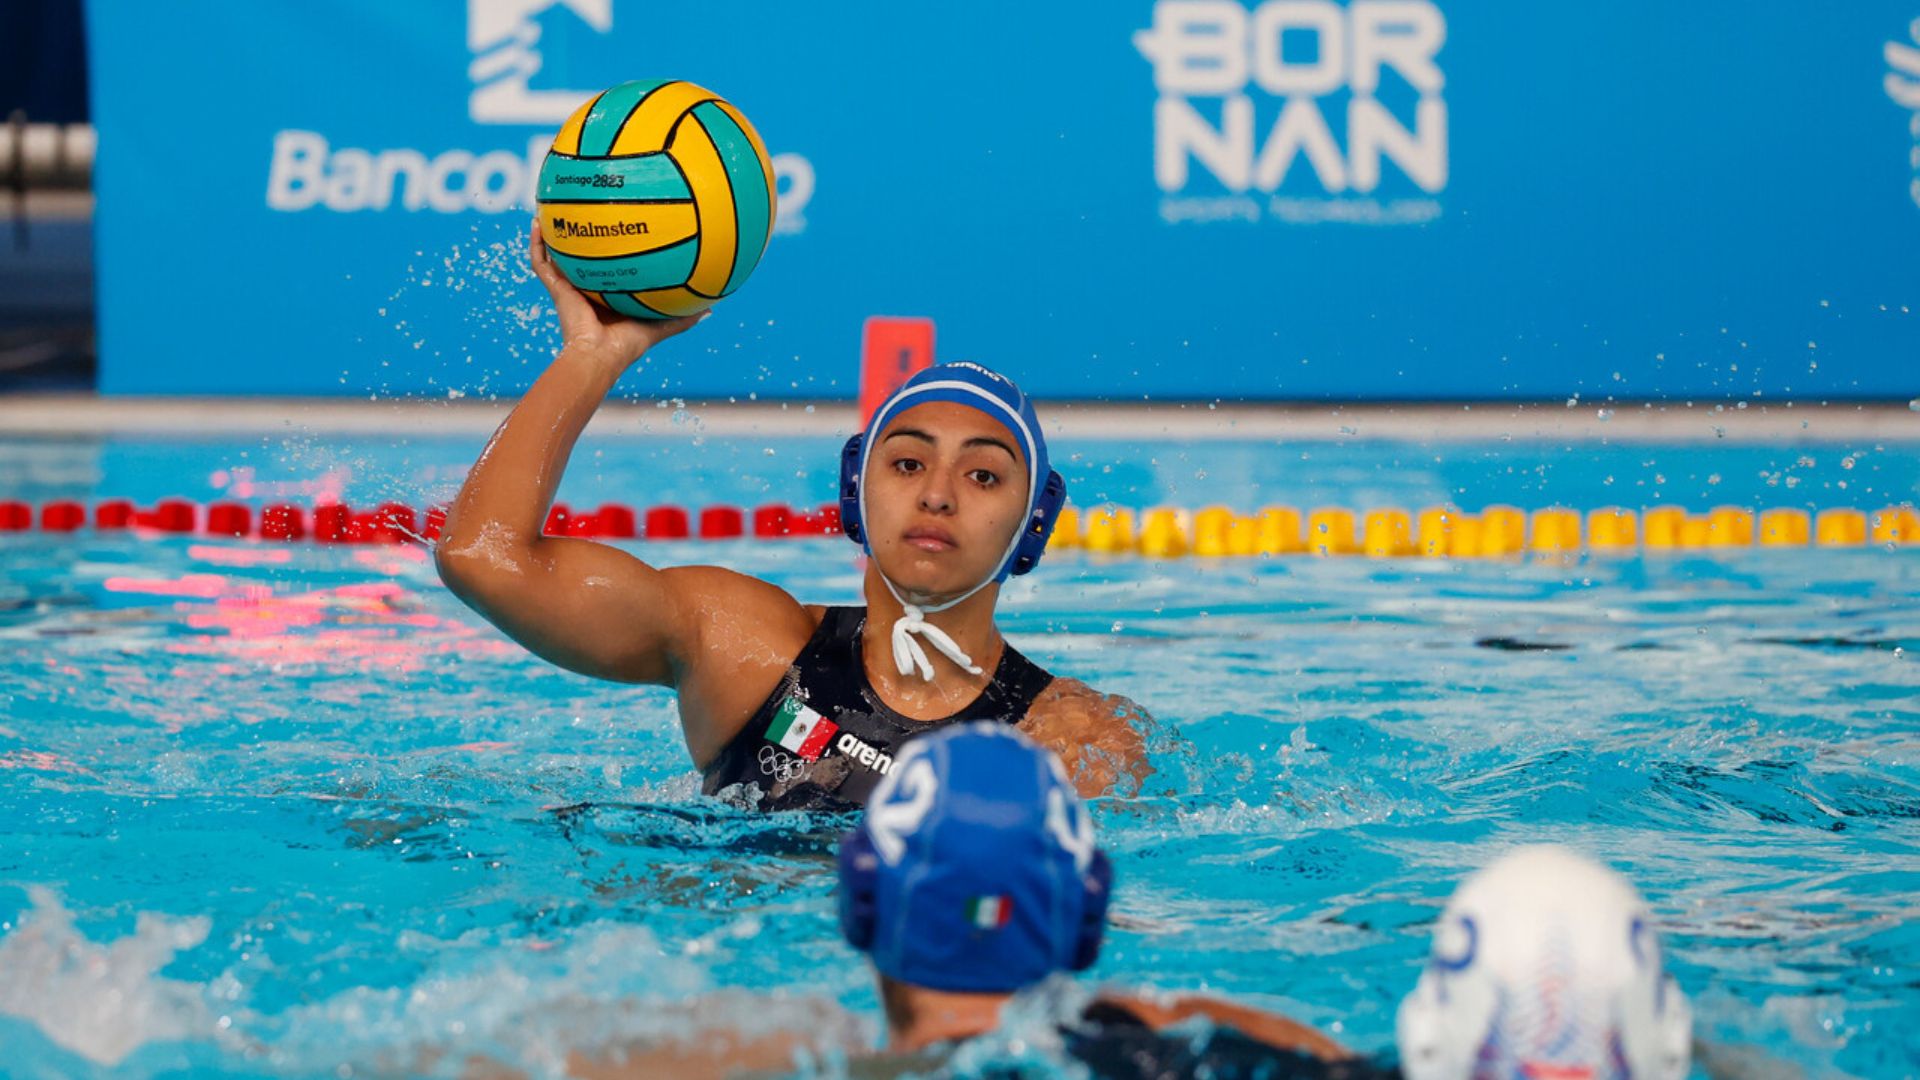 Female's Water Polo: Mexico Secures first victory